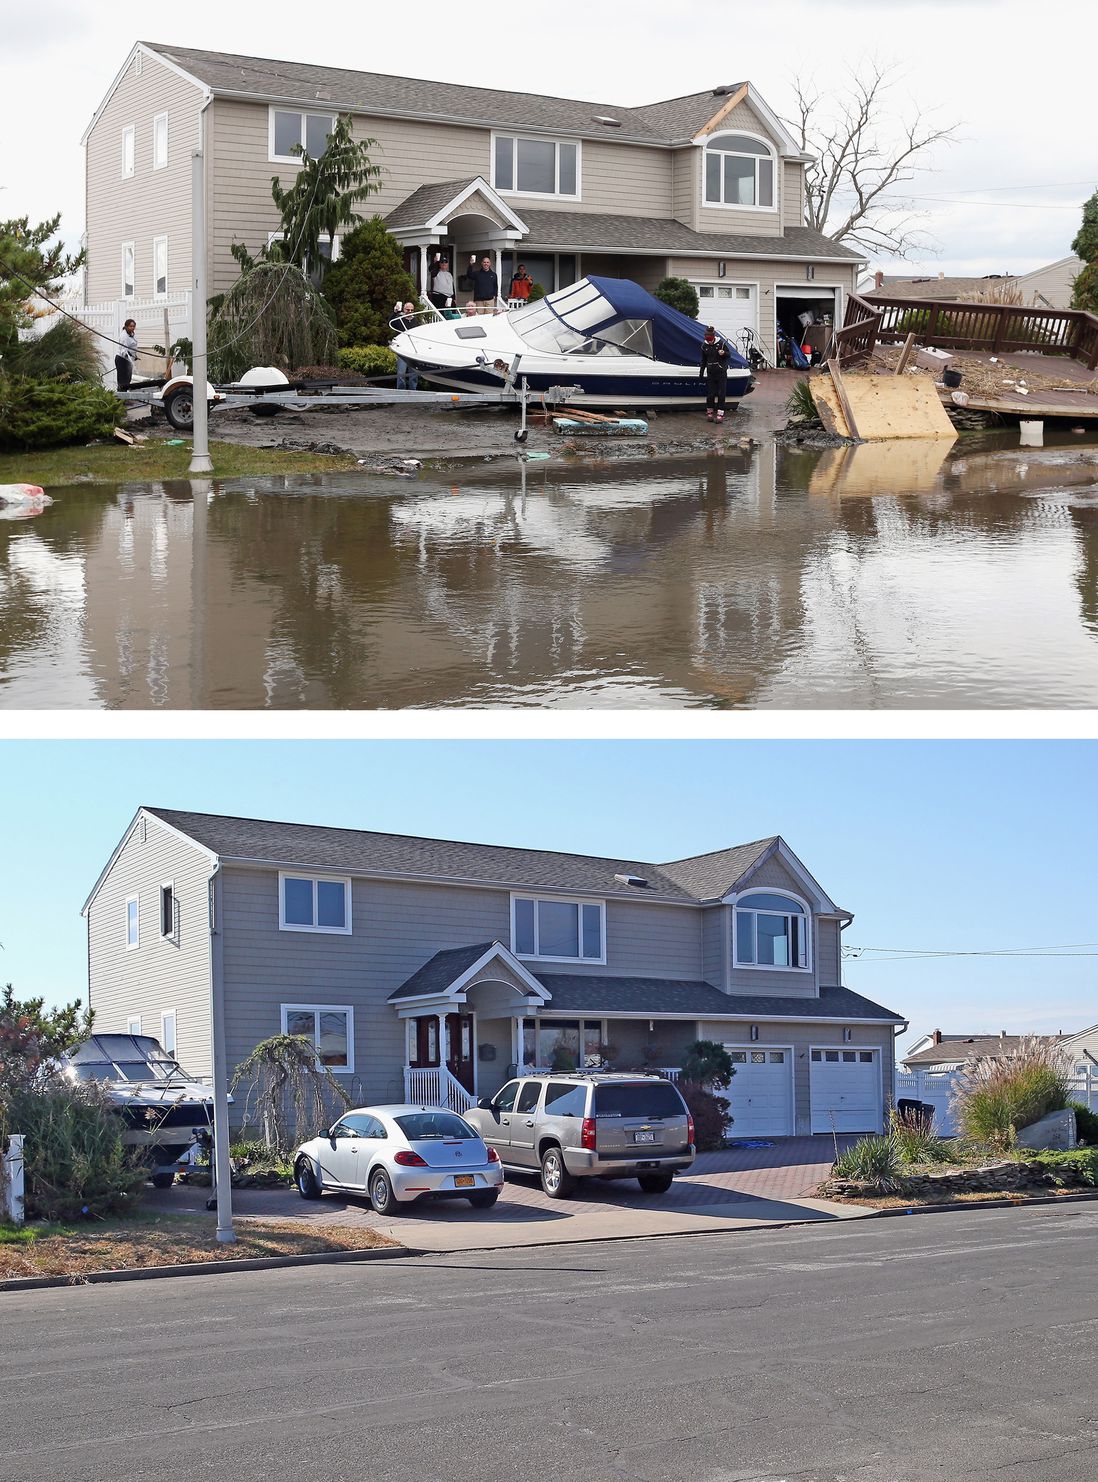 [Top] Residents of West Lido Boulevard take a break during cleanup operations following Hurricane Sandy on October 31, 2012 in Lindenhurst, New York. [Bottom] Cars sit parked in a driveway of a home on West Lido Boulevard October 22, 2013 in Lindenhurst, New York.